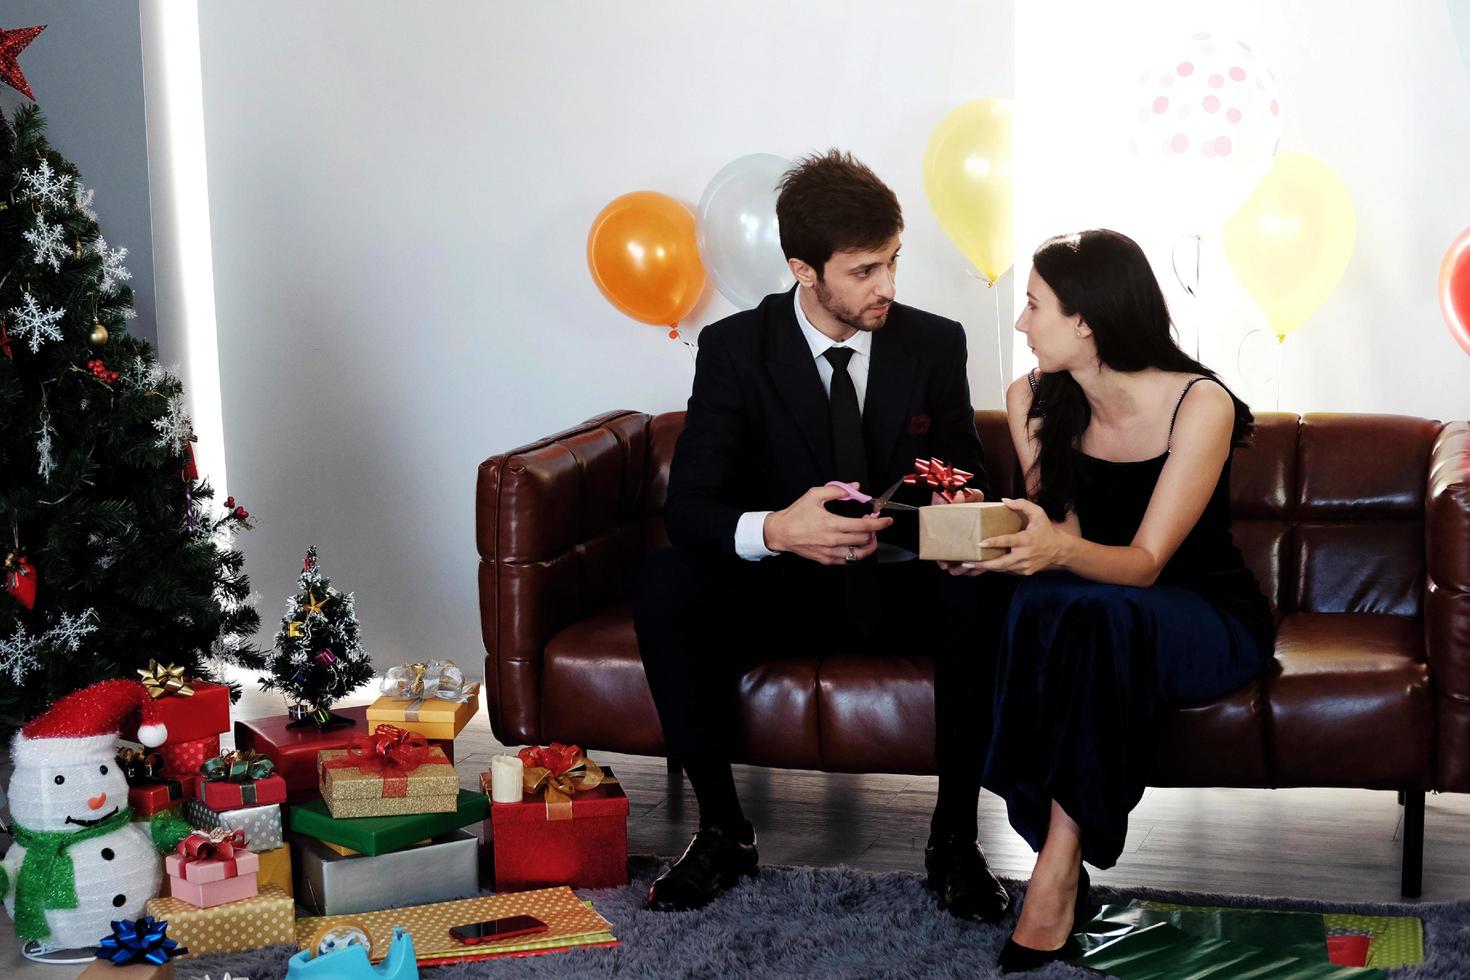 Sweet couple Love smile and spending Romantic christmas time and celebrating new year eve on Brown Sofa decoration with Christmas tree, colorful balloon and Gift Boxes in Living room at home photo